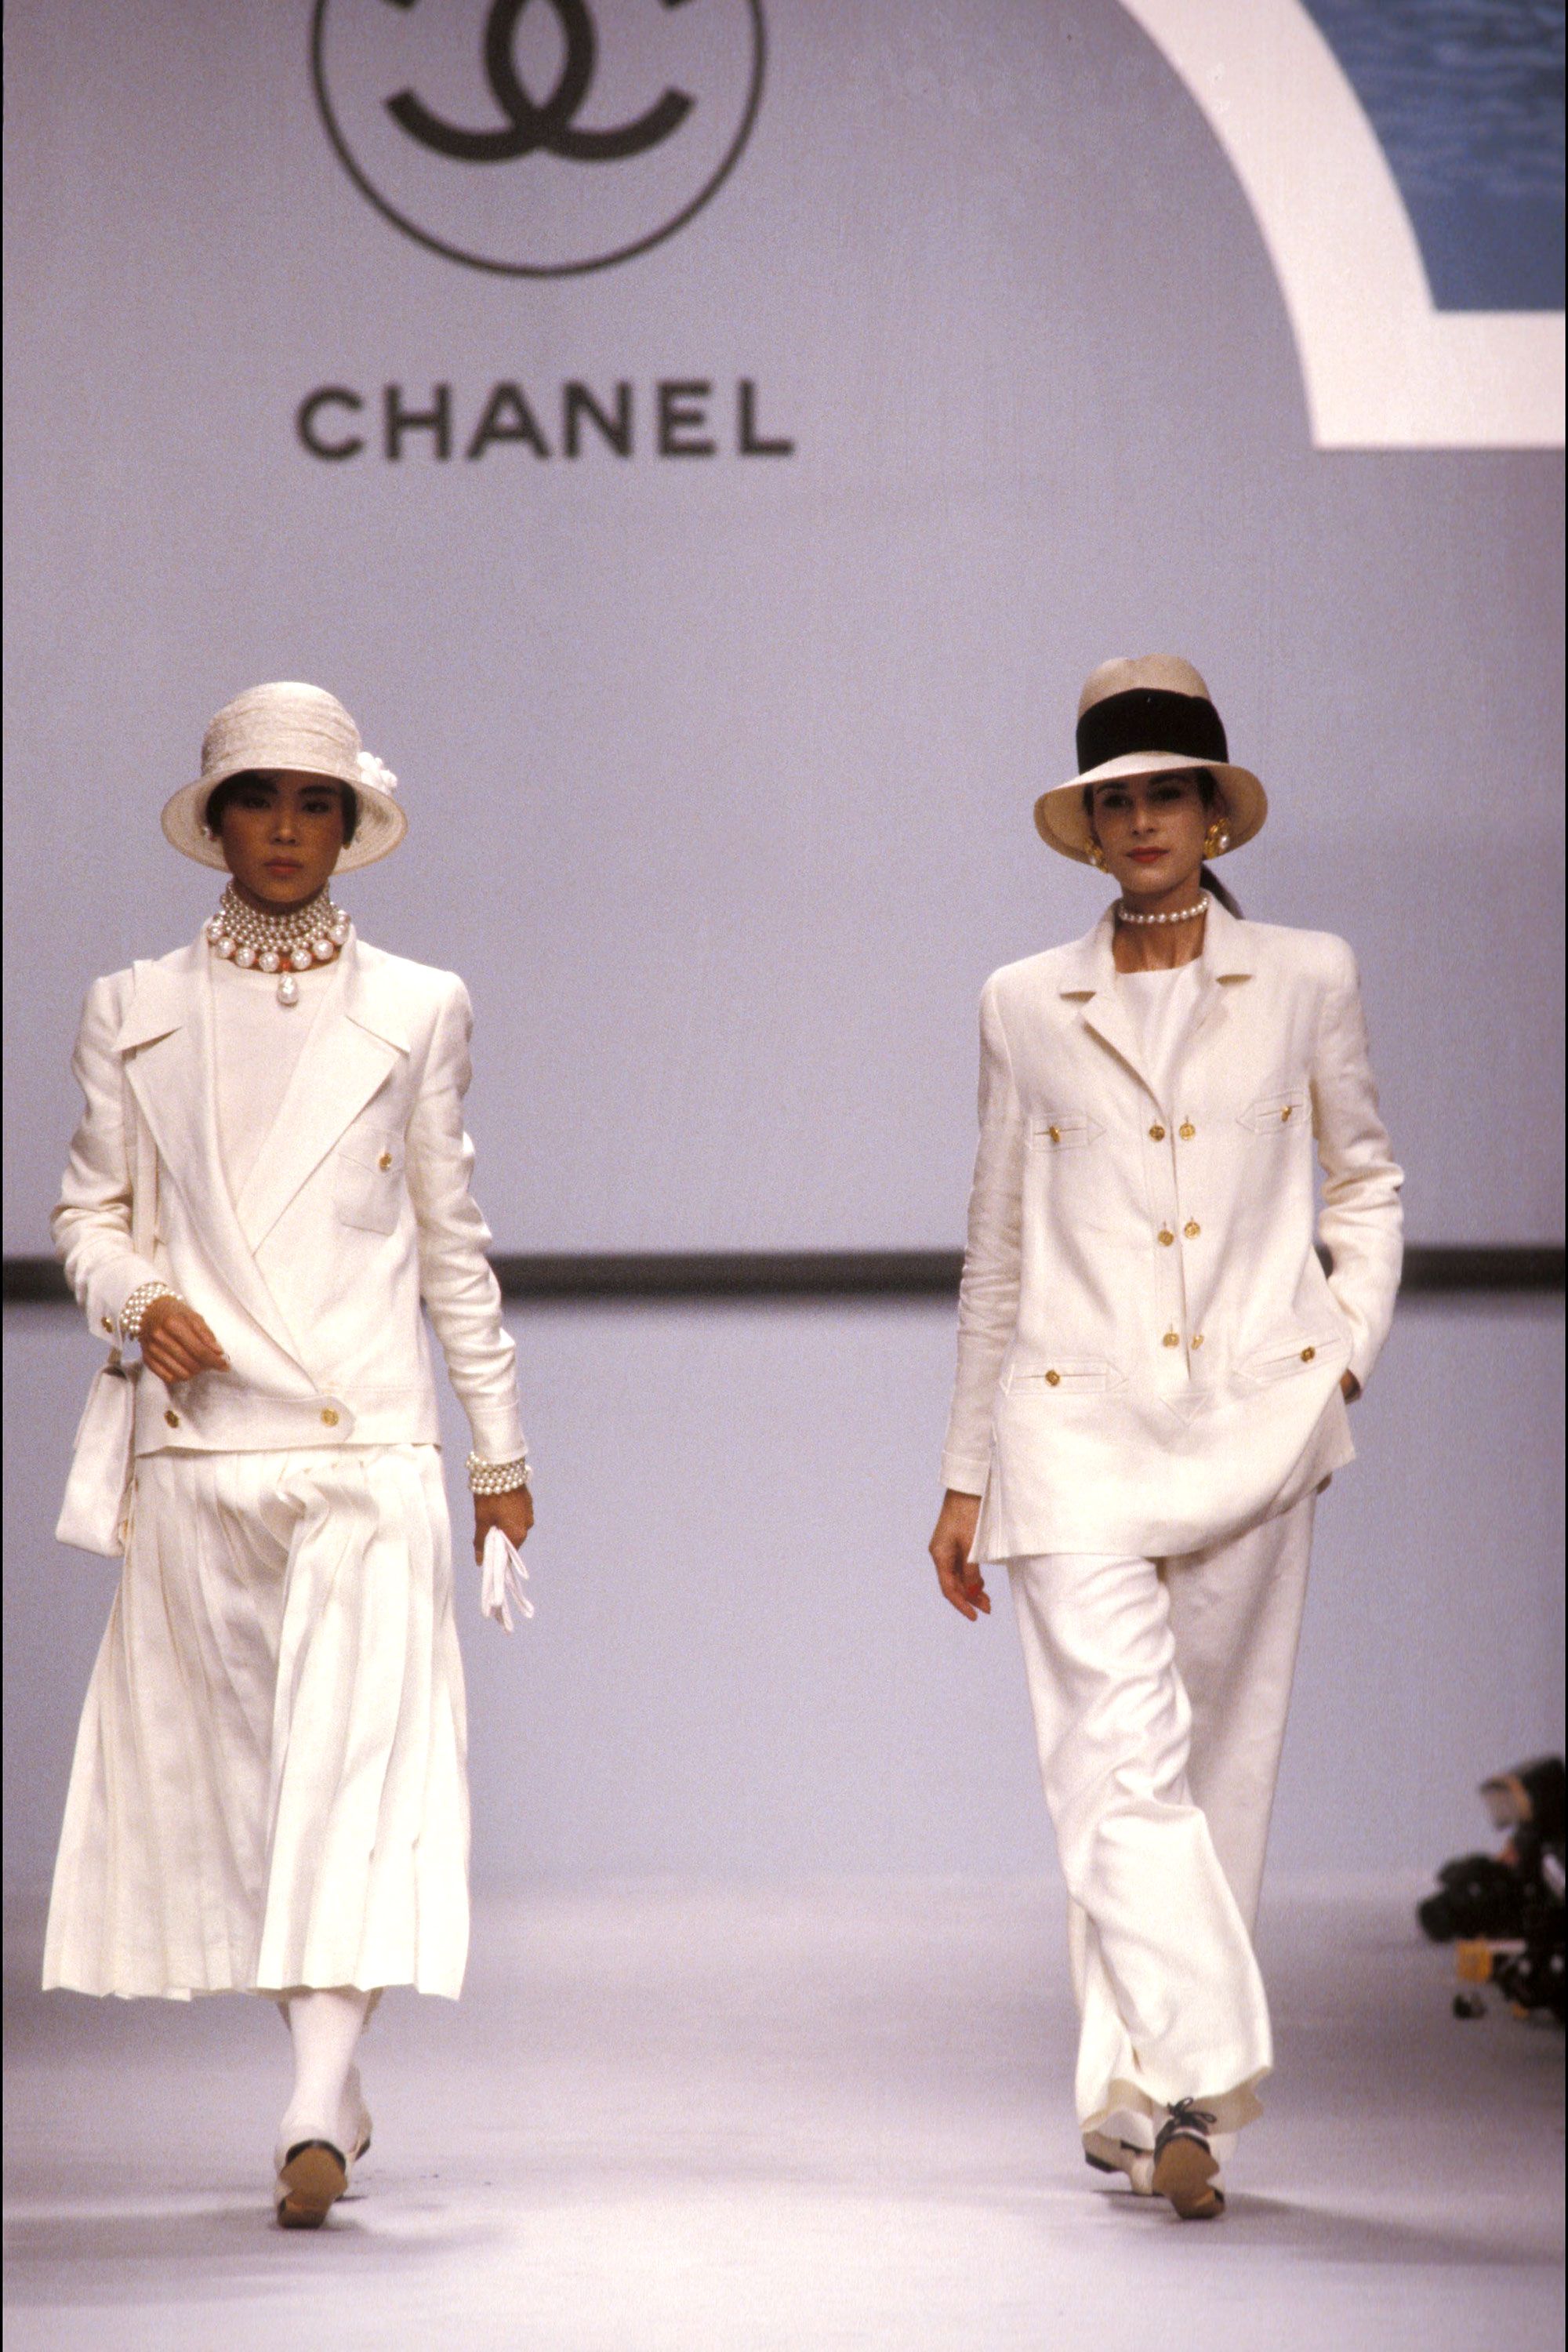 indre rack Pjece Chanel's Fashion Shows Over the Years - 1978 - 2015 Chanel Runway Images